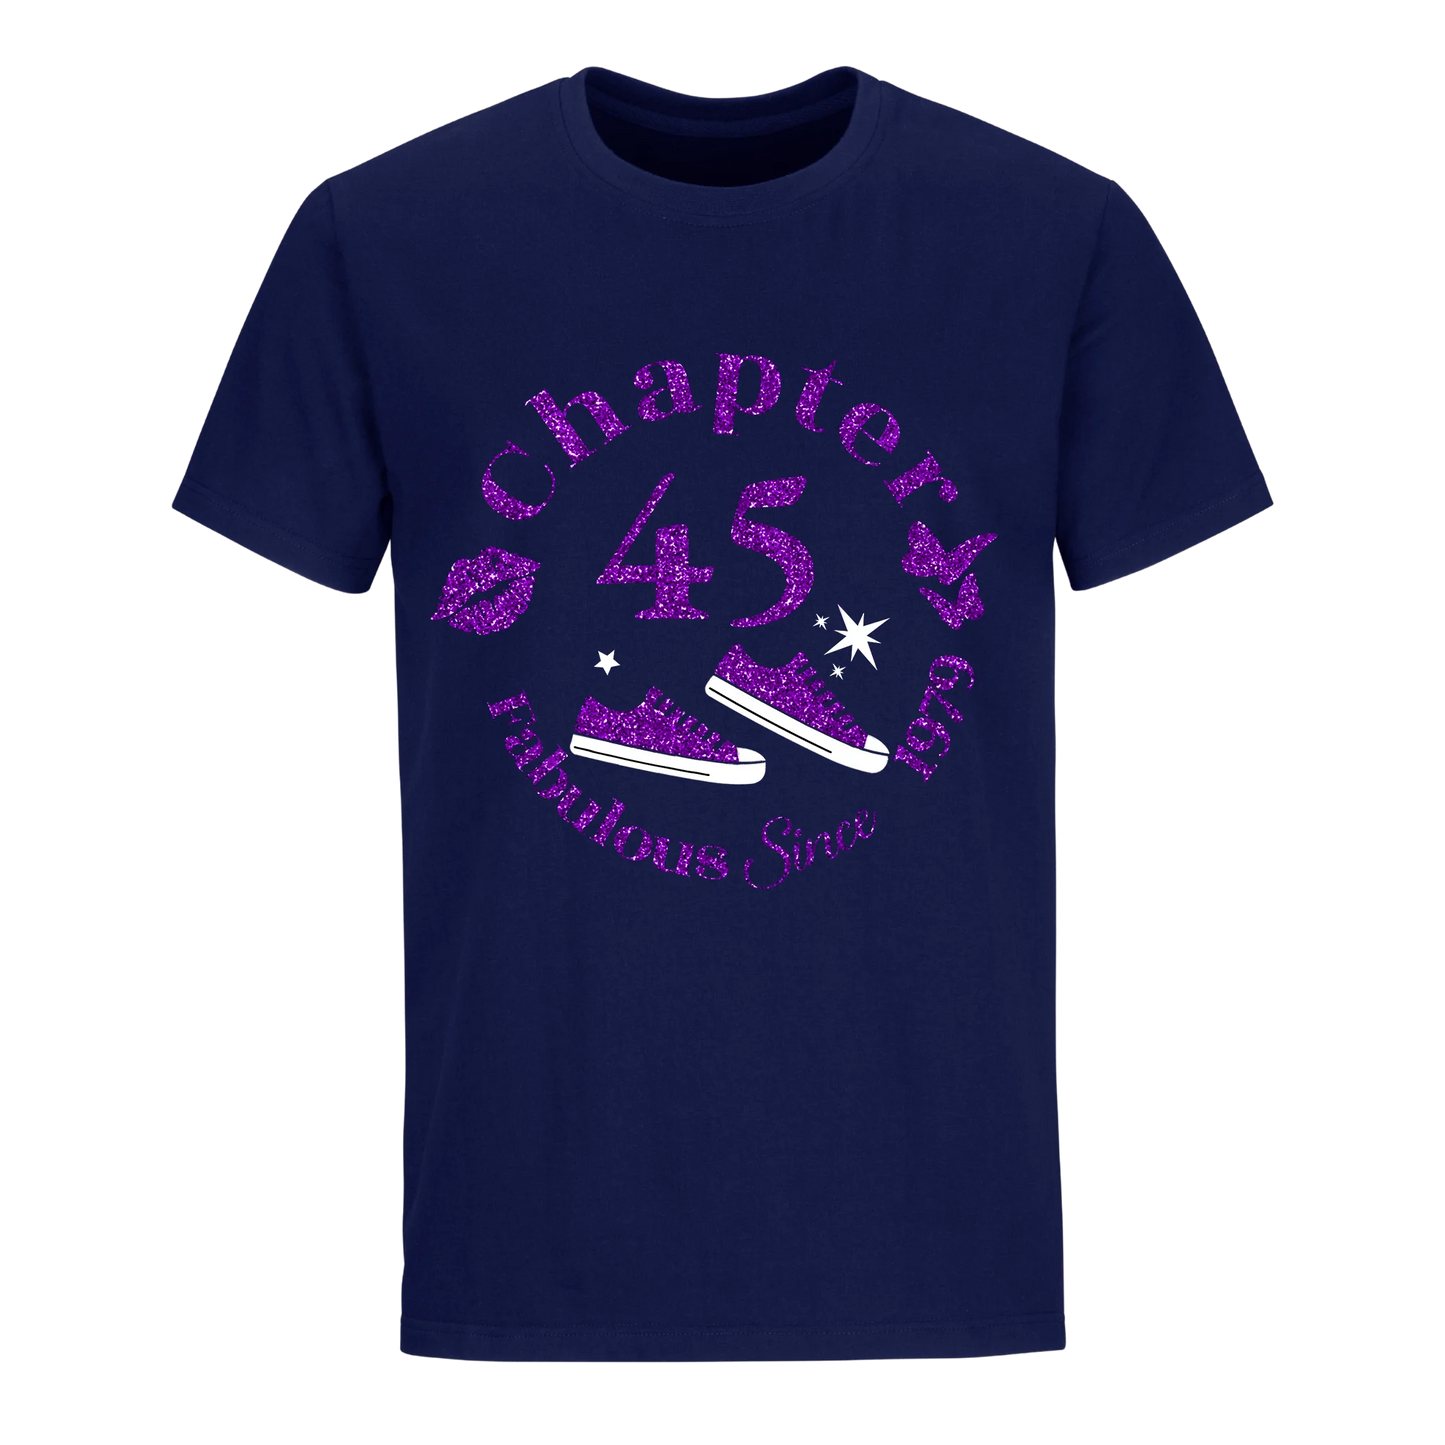 CHAPTER 45TH FAB SINCE 1979 UNISEX SHIRT